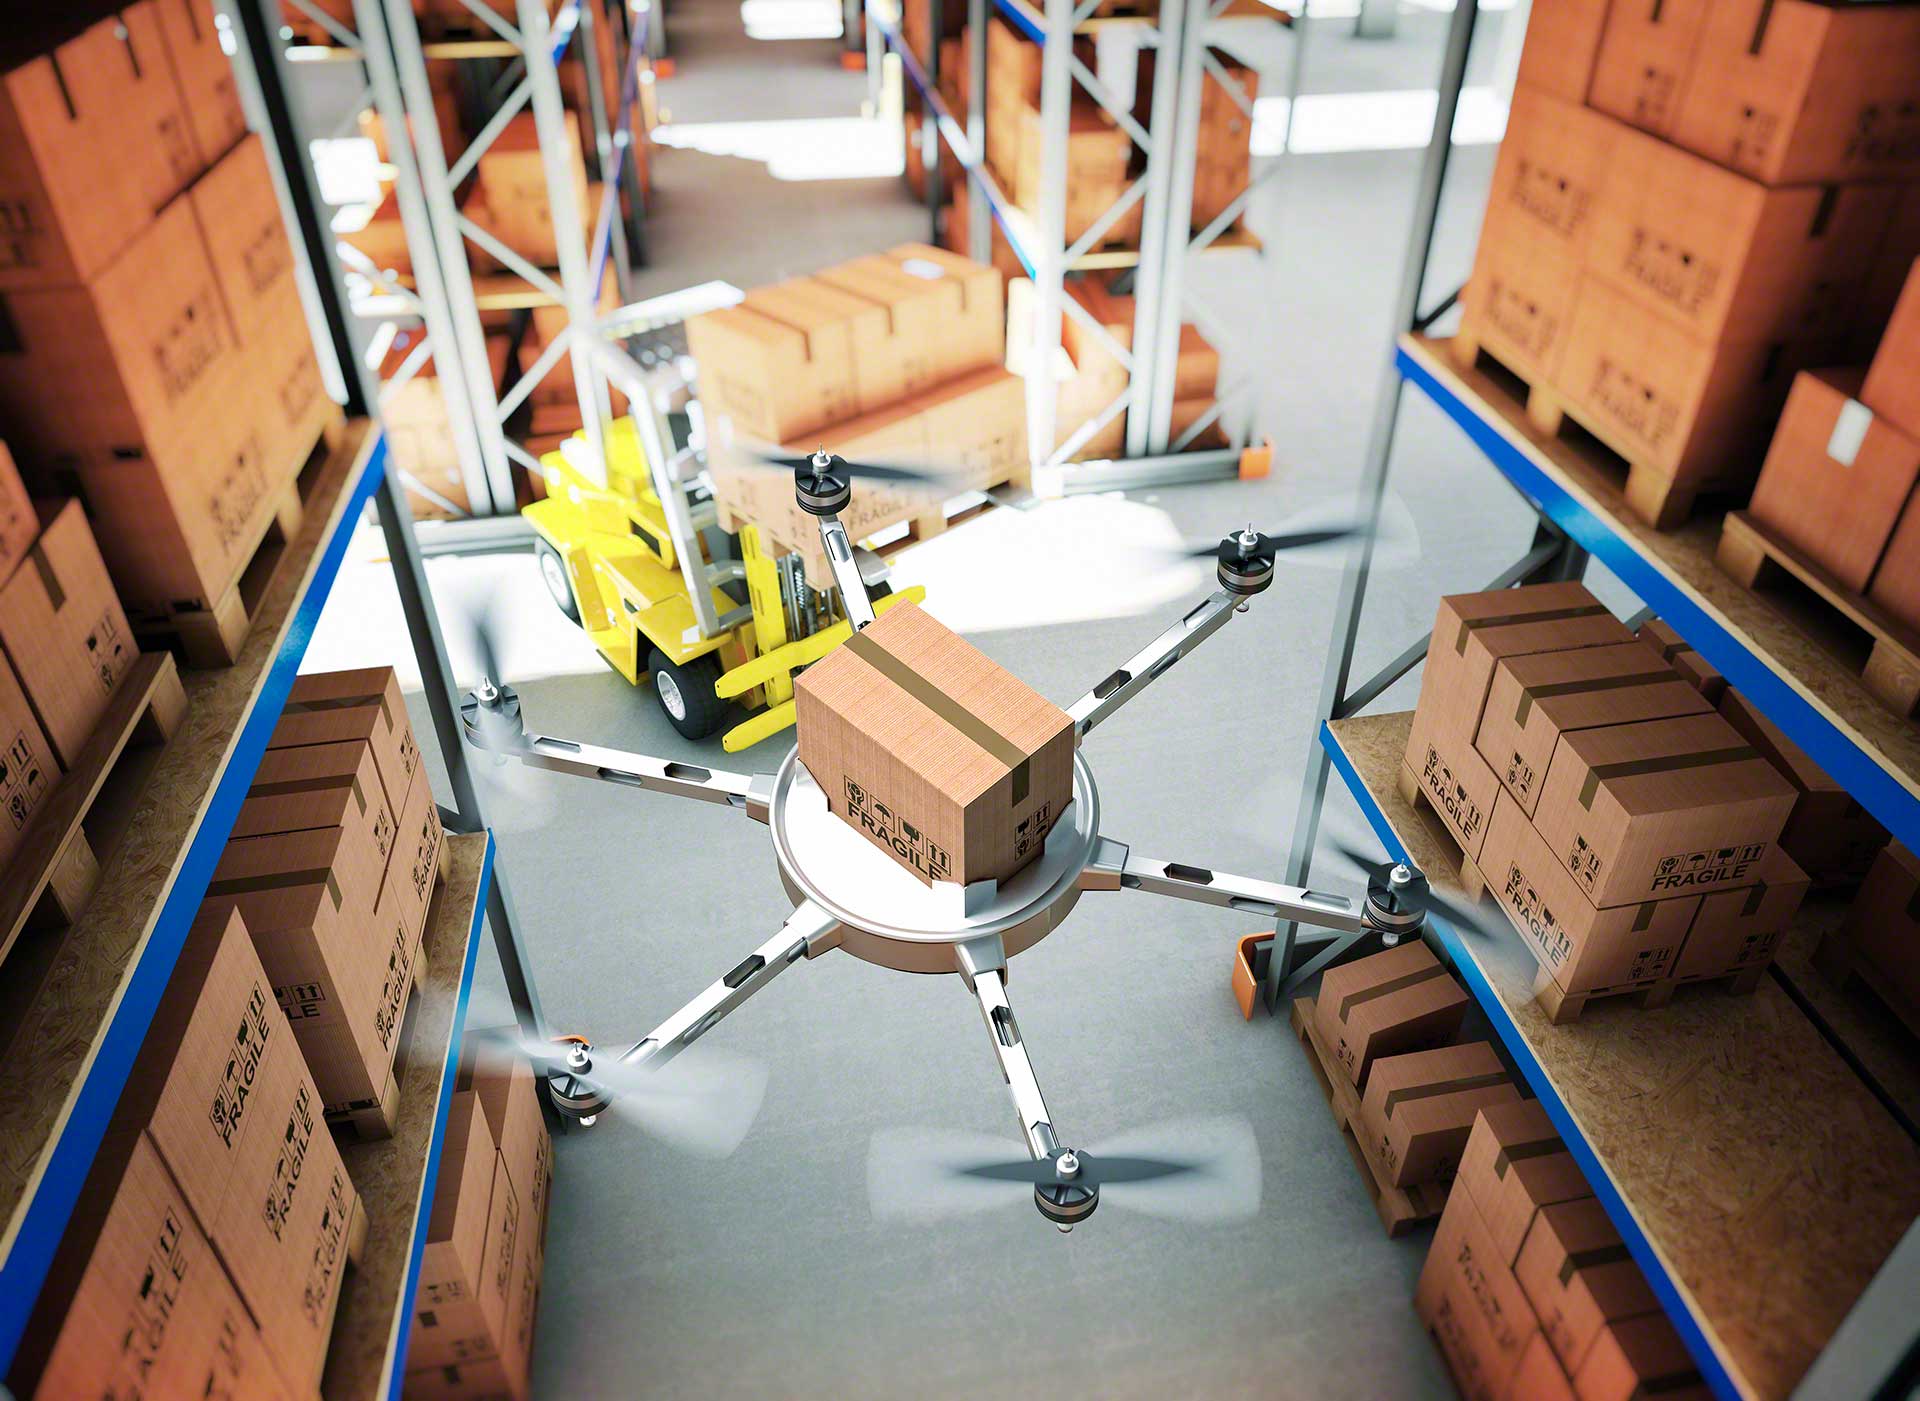 In warehouses, drones could manage inventory, locating each item